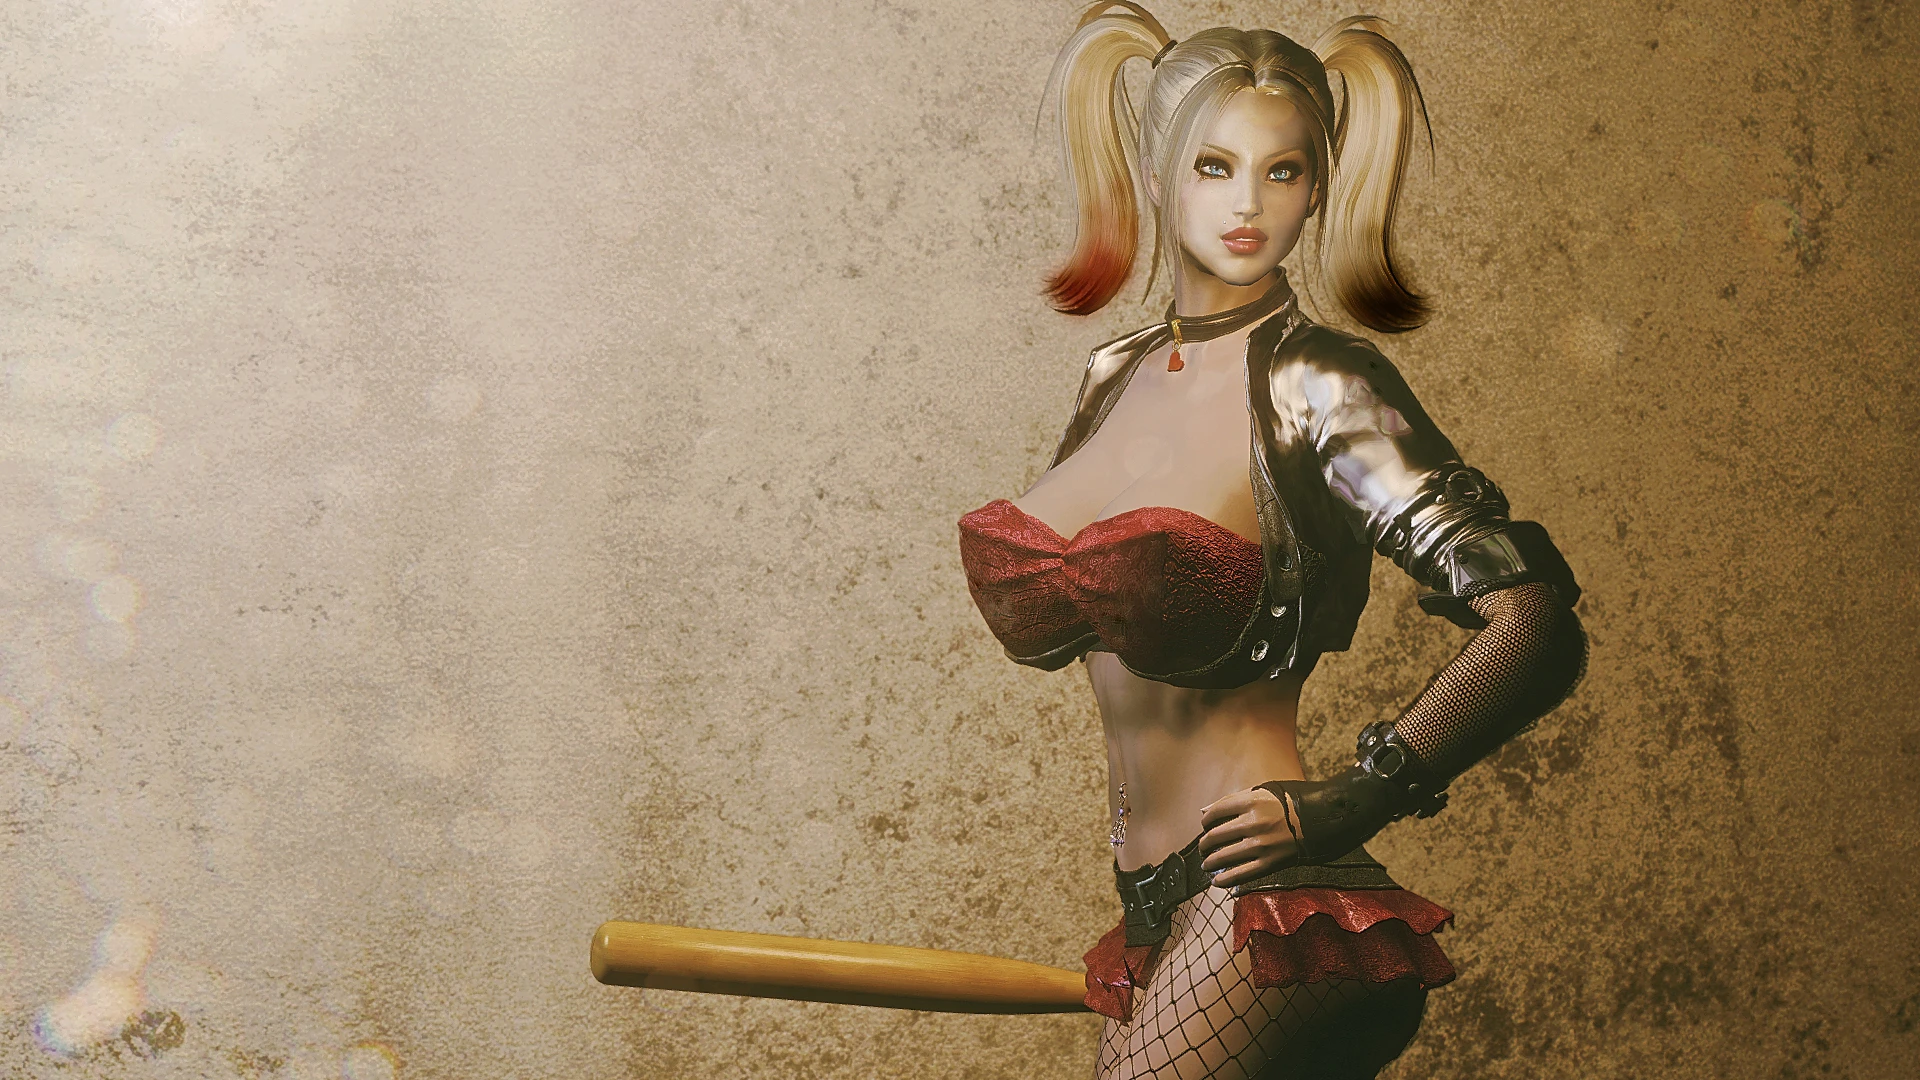 My Custom Sexy Harley Quinn Deleted By Mistake At Skyrim Nexus Mods